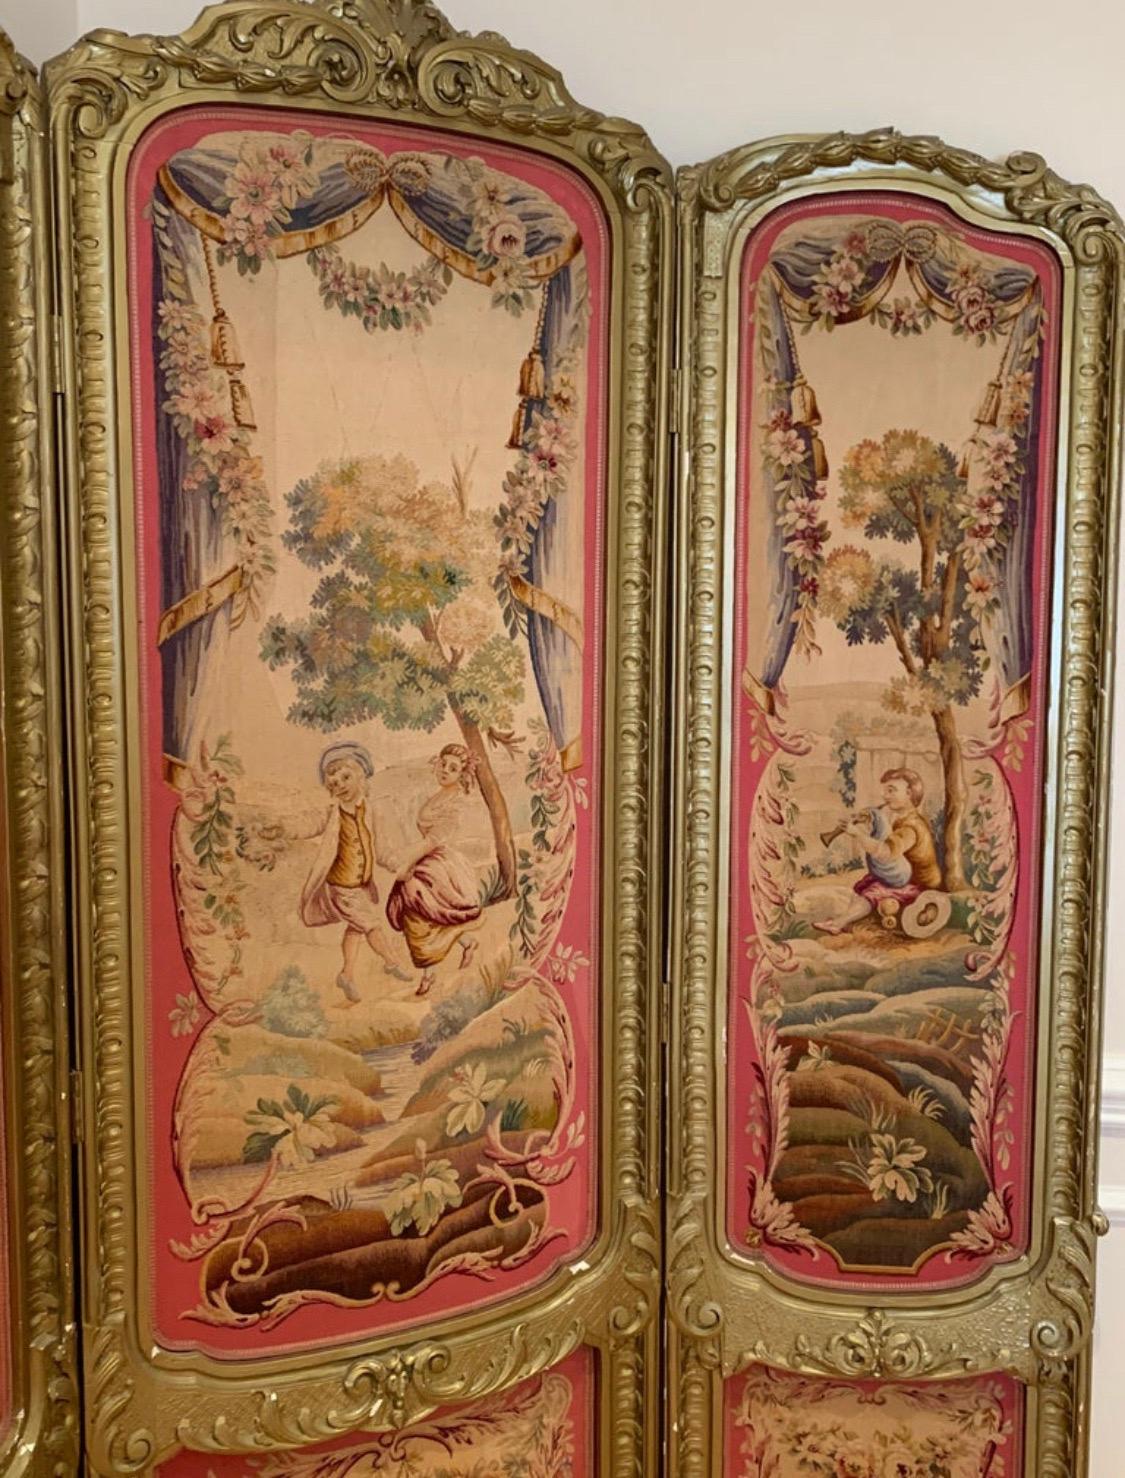 Gorgeous 19th century Louis XV Regency gilded screen and fire screen with Tapestries. The Rococo style tapestries are in pristine condition with very minor loss of gilding to the frames. The larger three panel screen has a pristine pink satin